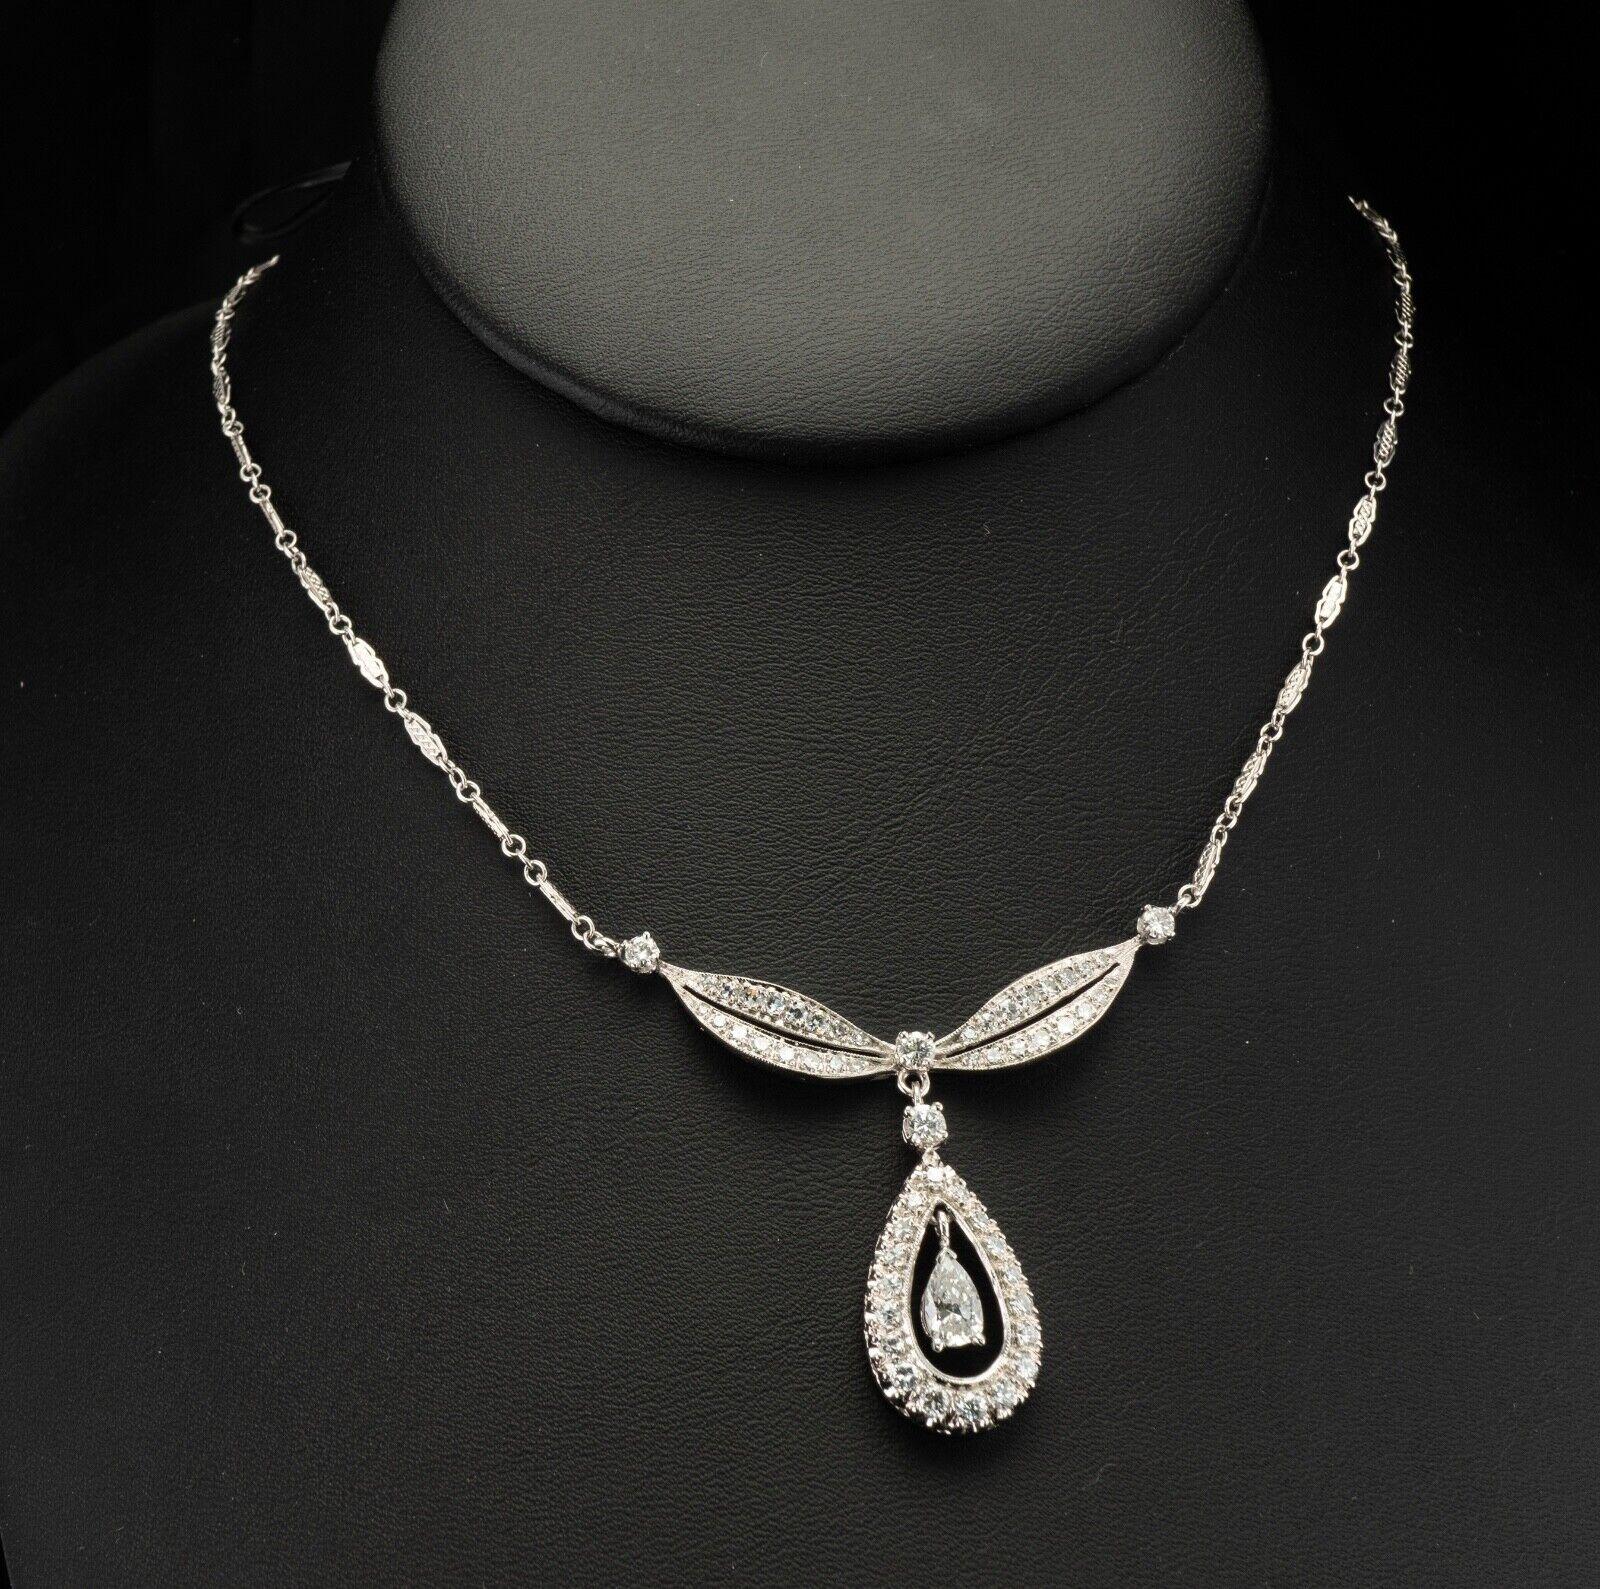 Diamond Necklace Choker Vintage 14K White Gold Teardrop Pendant 2.38 TDW

This beautiful vintage Pendant is finely crafted in solid 14K White Gold and set with white and fiery diamonds. The center pear cut diamond is .60 carat of SI2 clarity and G